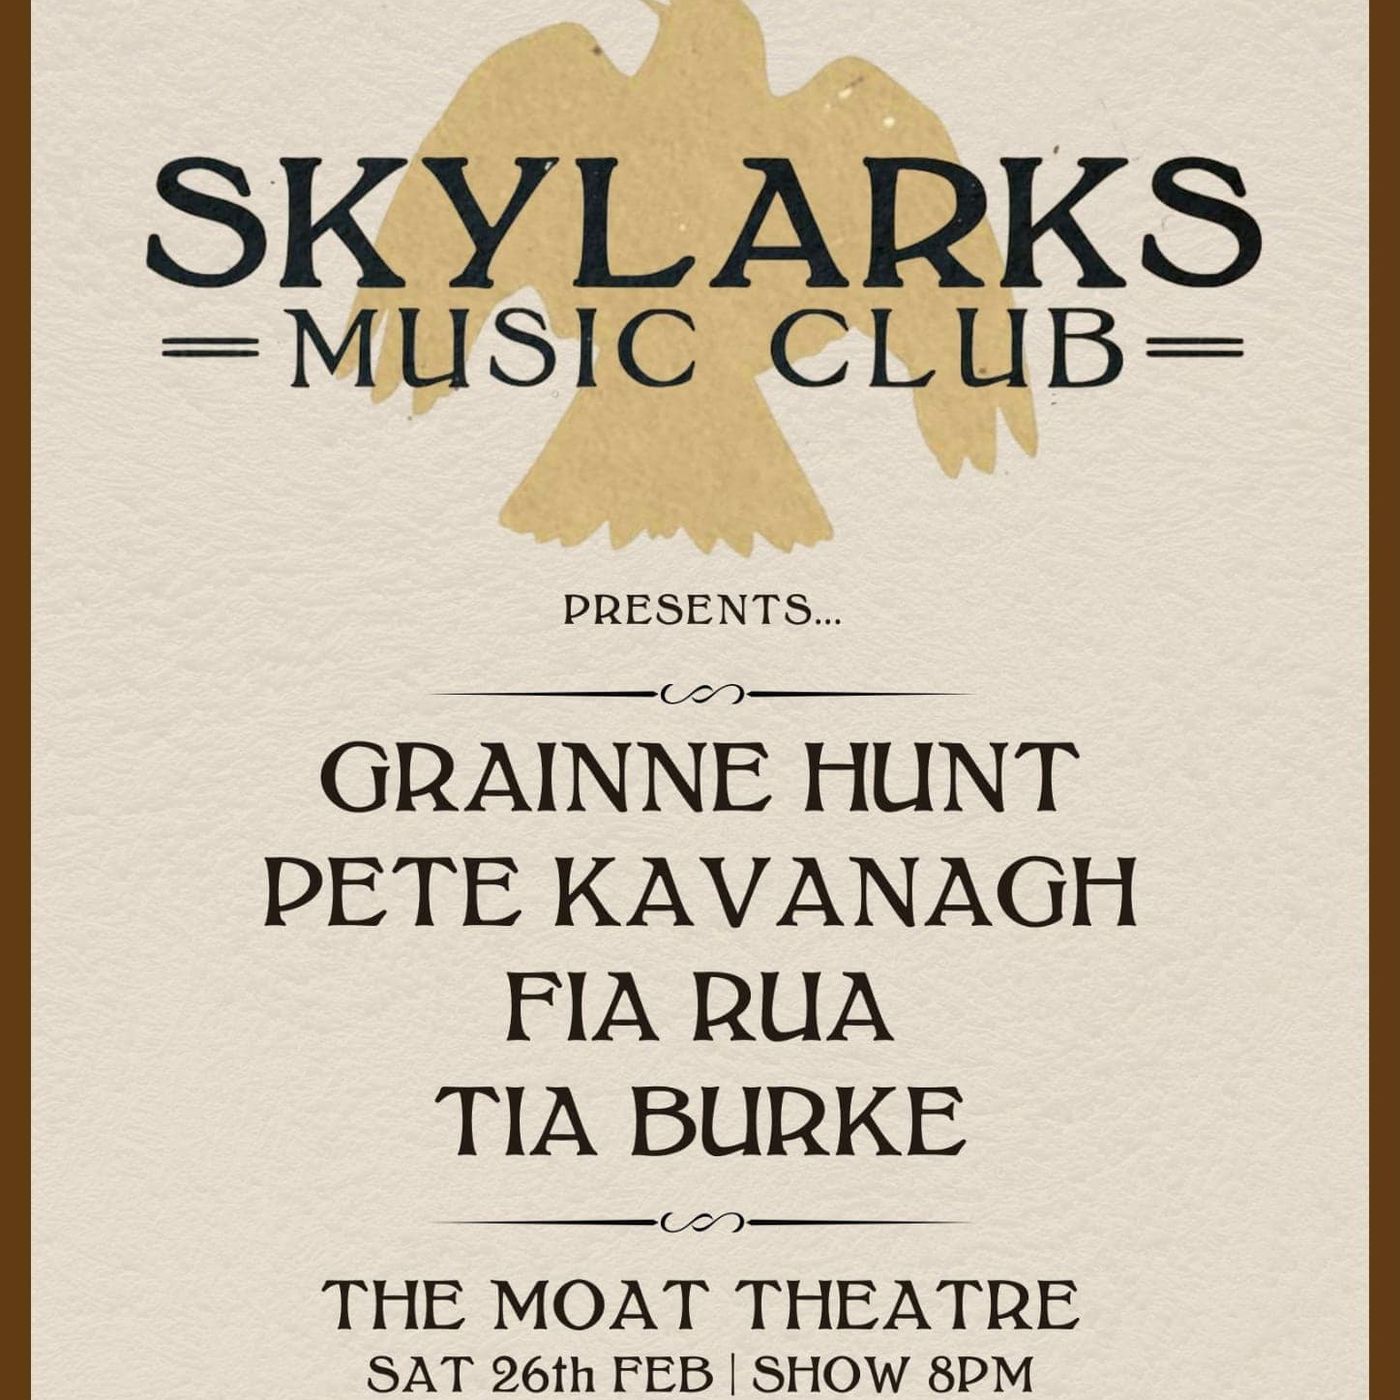 EP 13 - Skylarks Music Club at The Moat Theatre